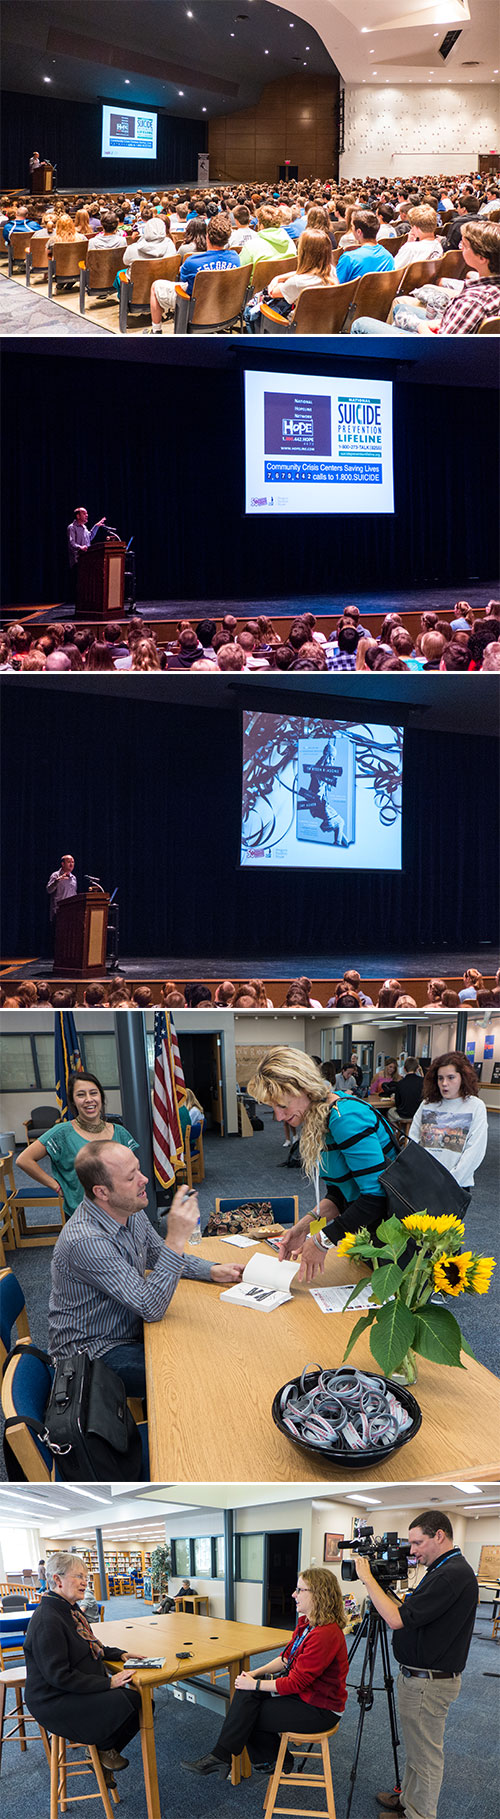 Jay Asher Events at Shawnee Mission East High School 10032014